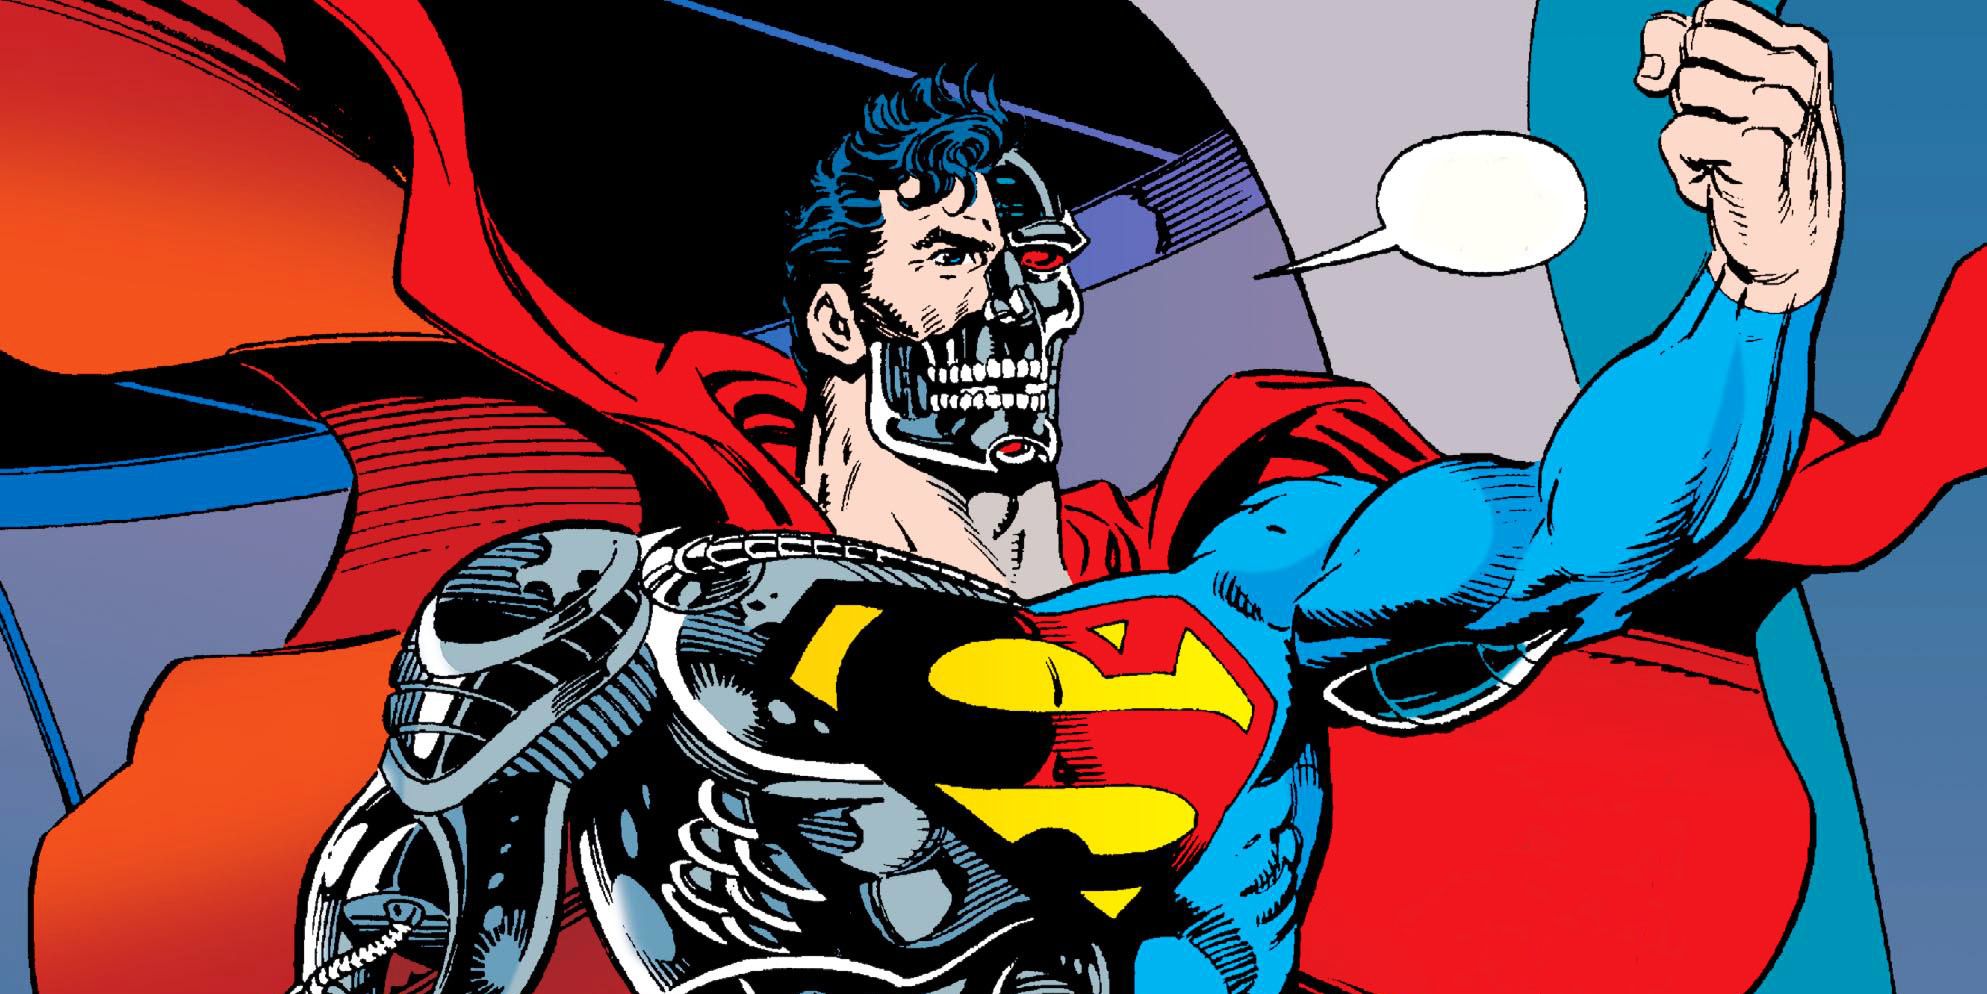 An image of comic art from Reign of the Supermen